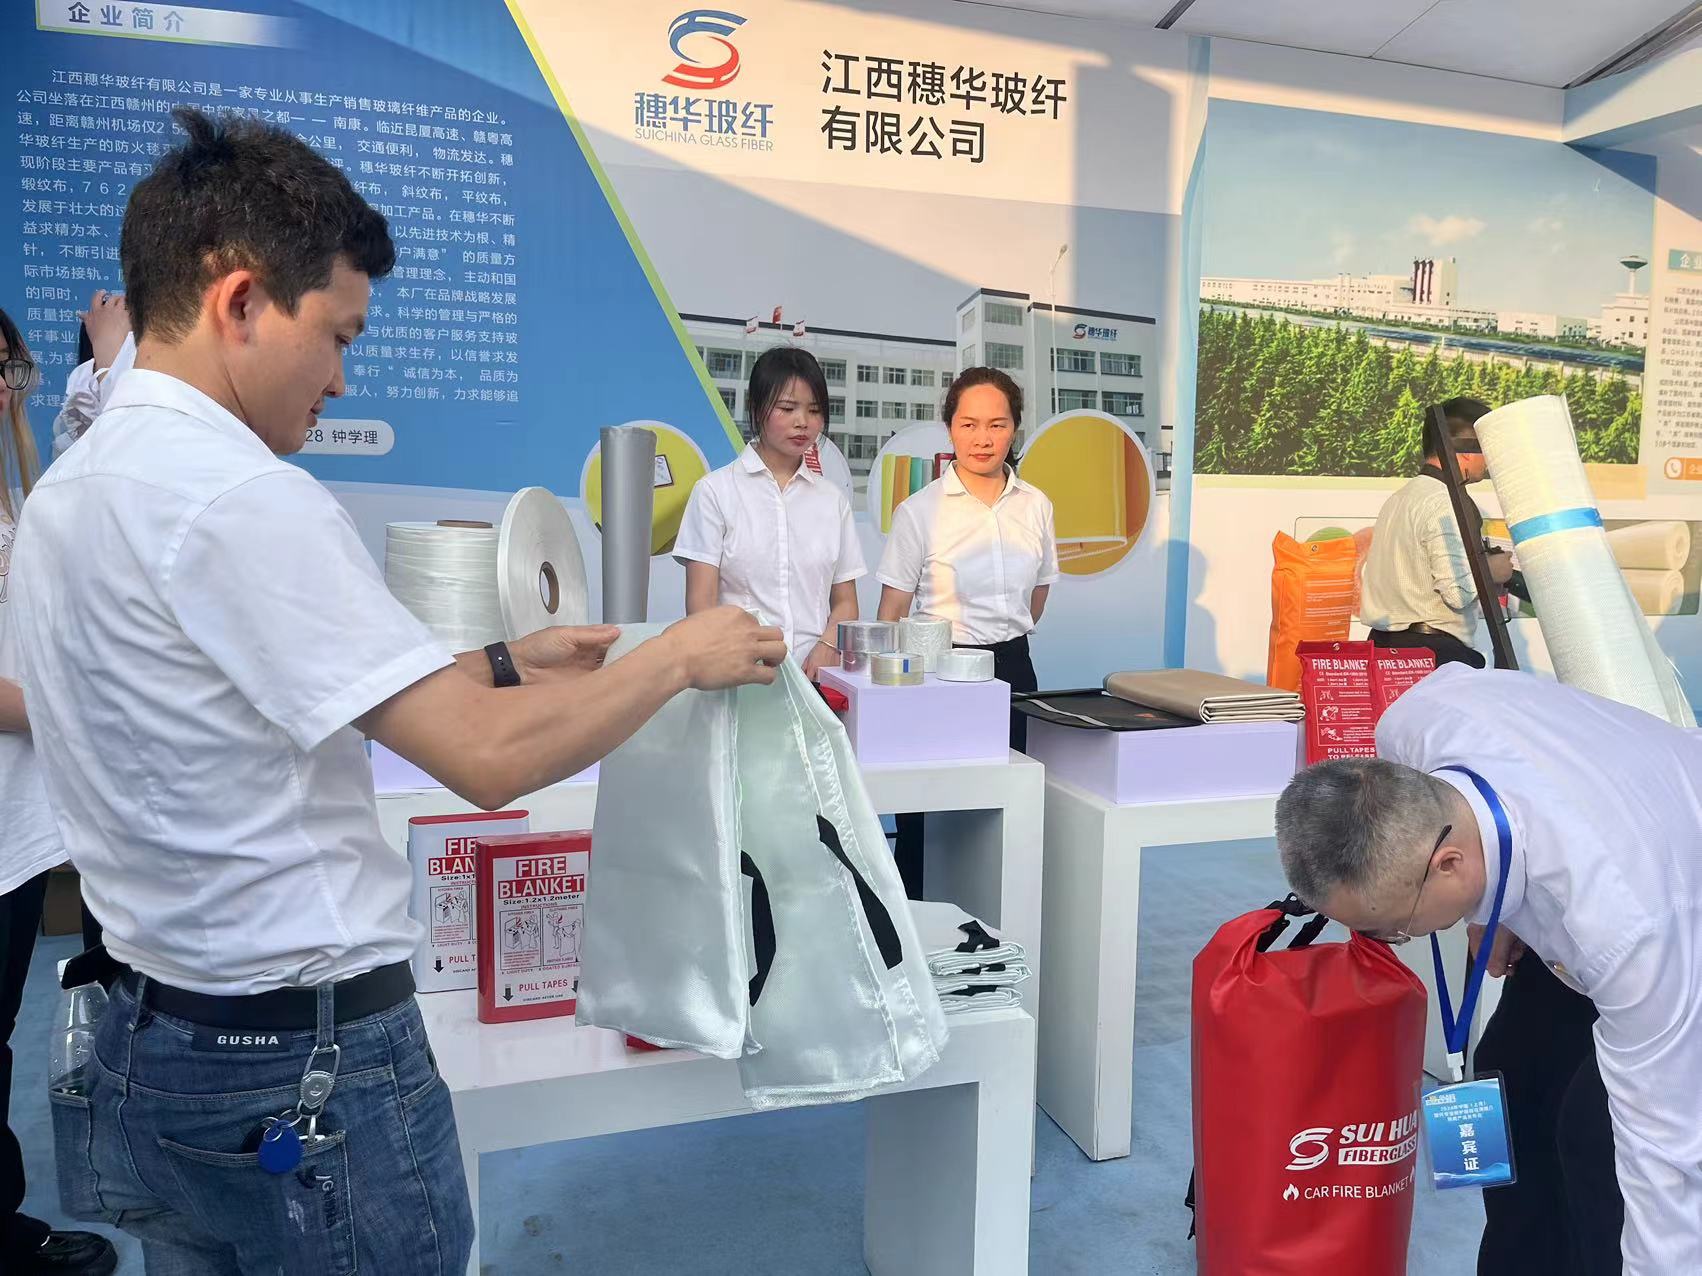 SUIHUA Participated in the fiberglass exhibition jointly organized by the government and the Fiberglass Association in Shangyou, Jiangxi.